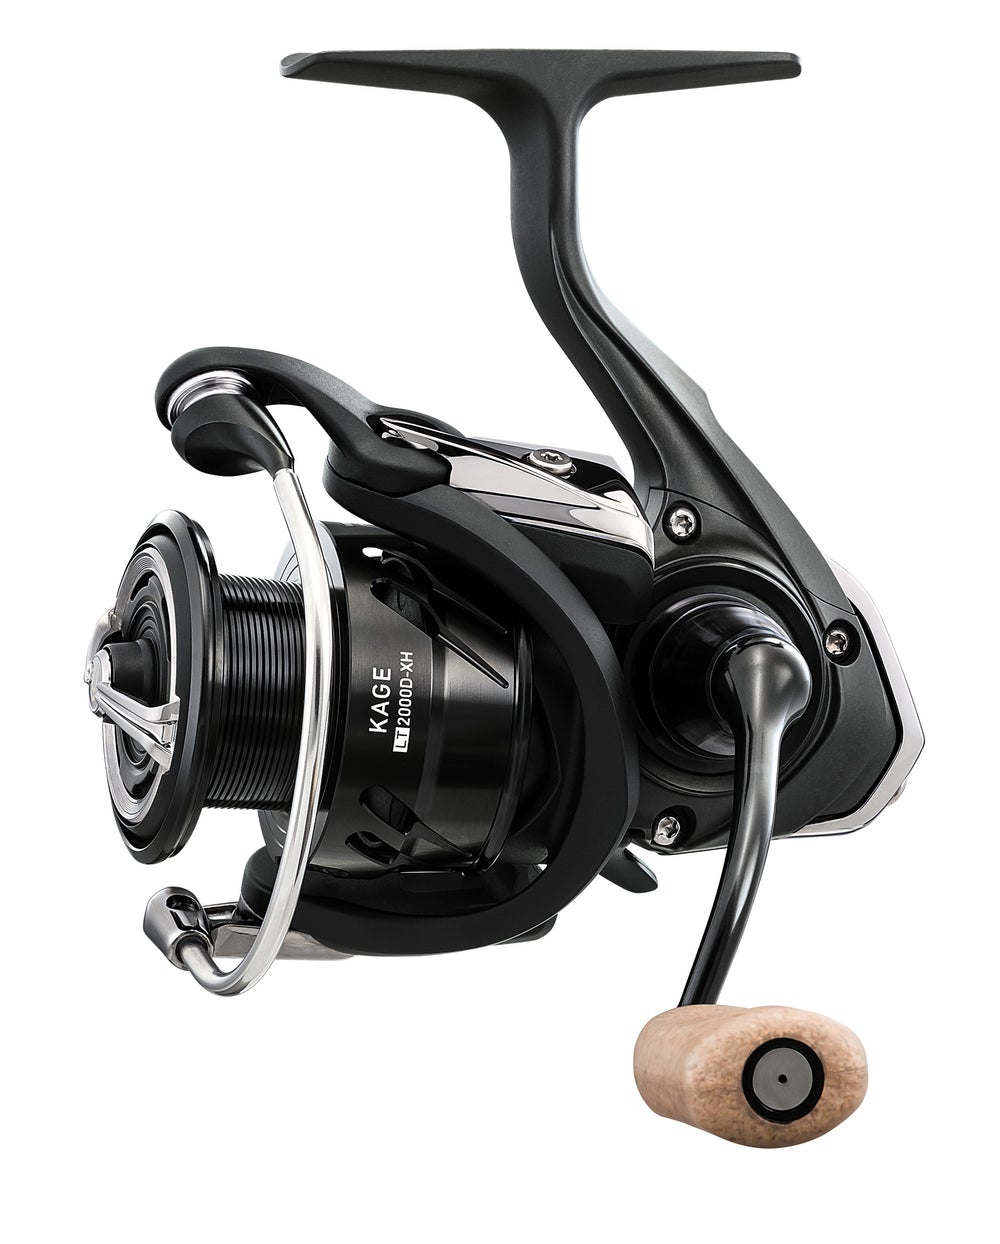 Daiwa AG1305X -- Service and Lubrication -- Young Martin's Reels